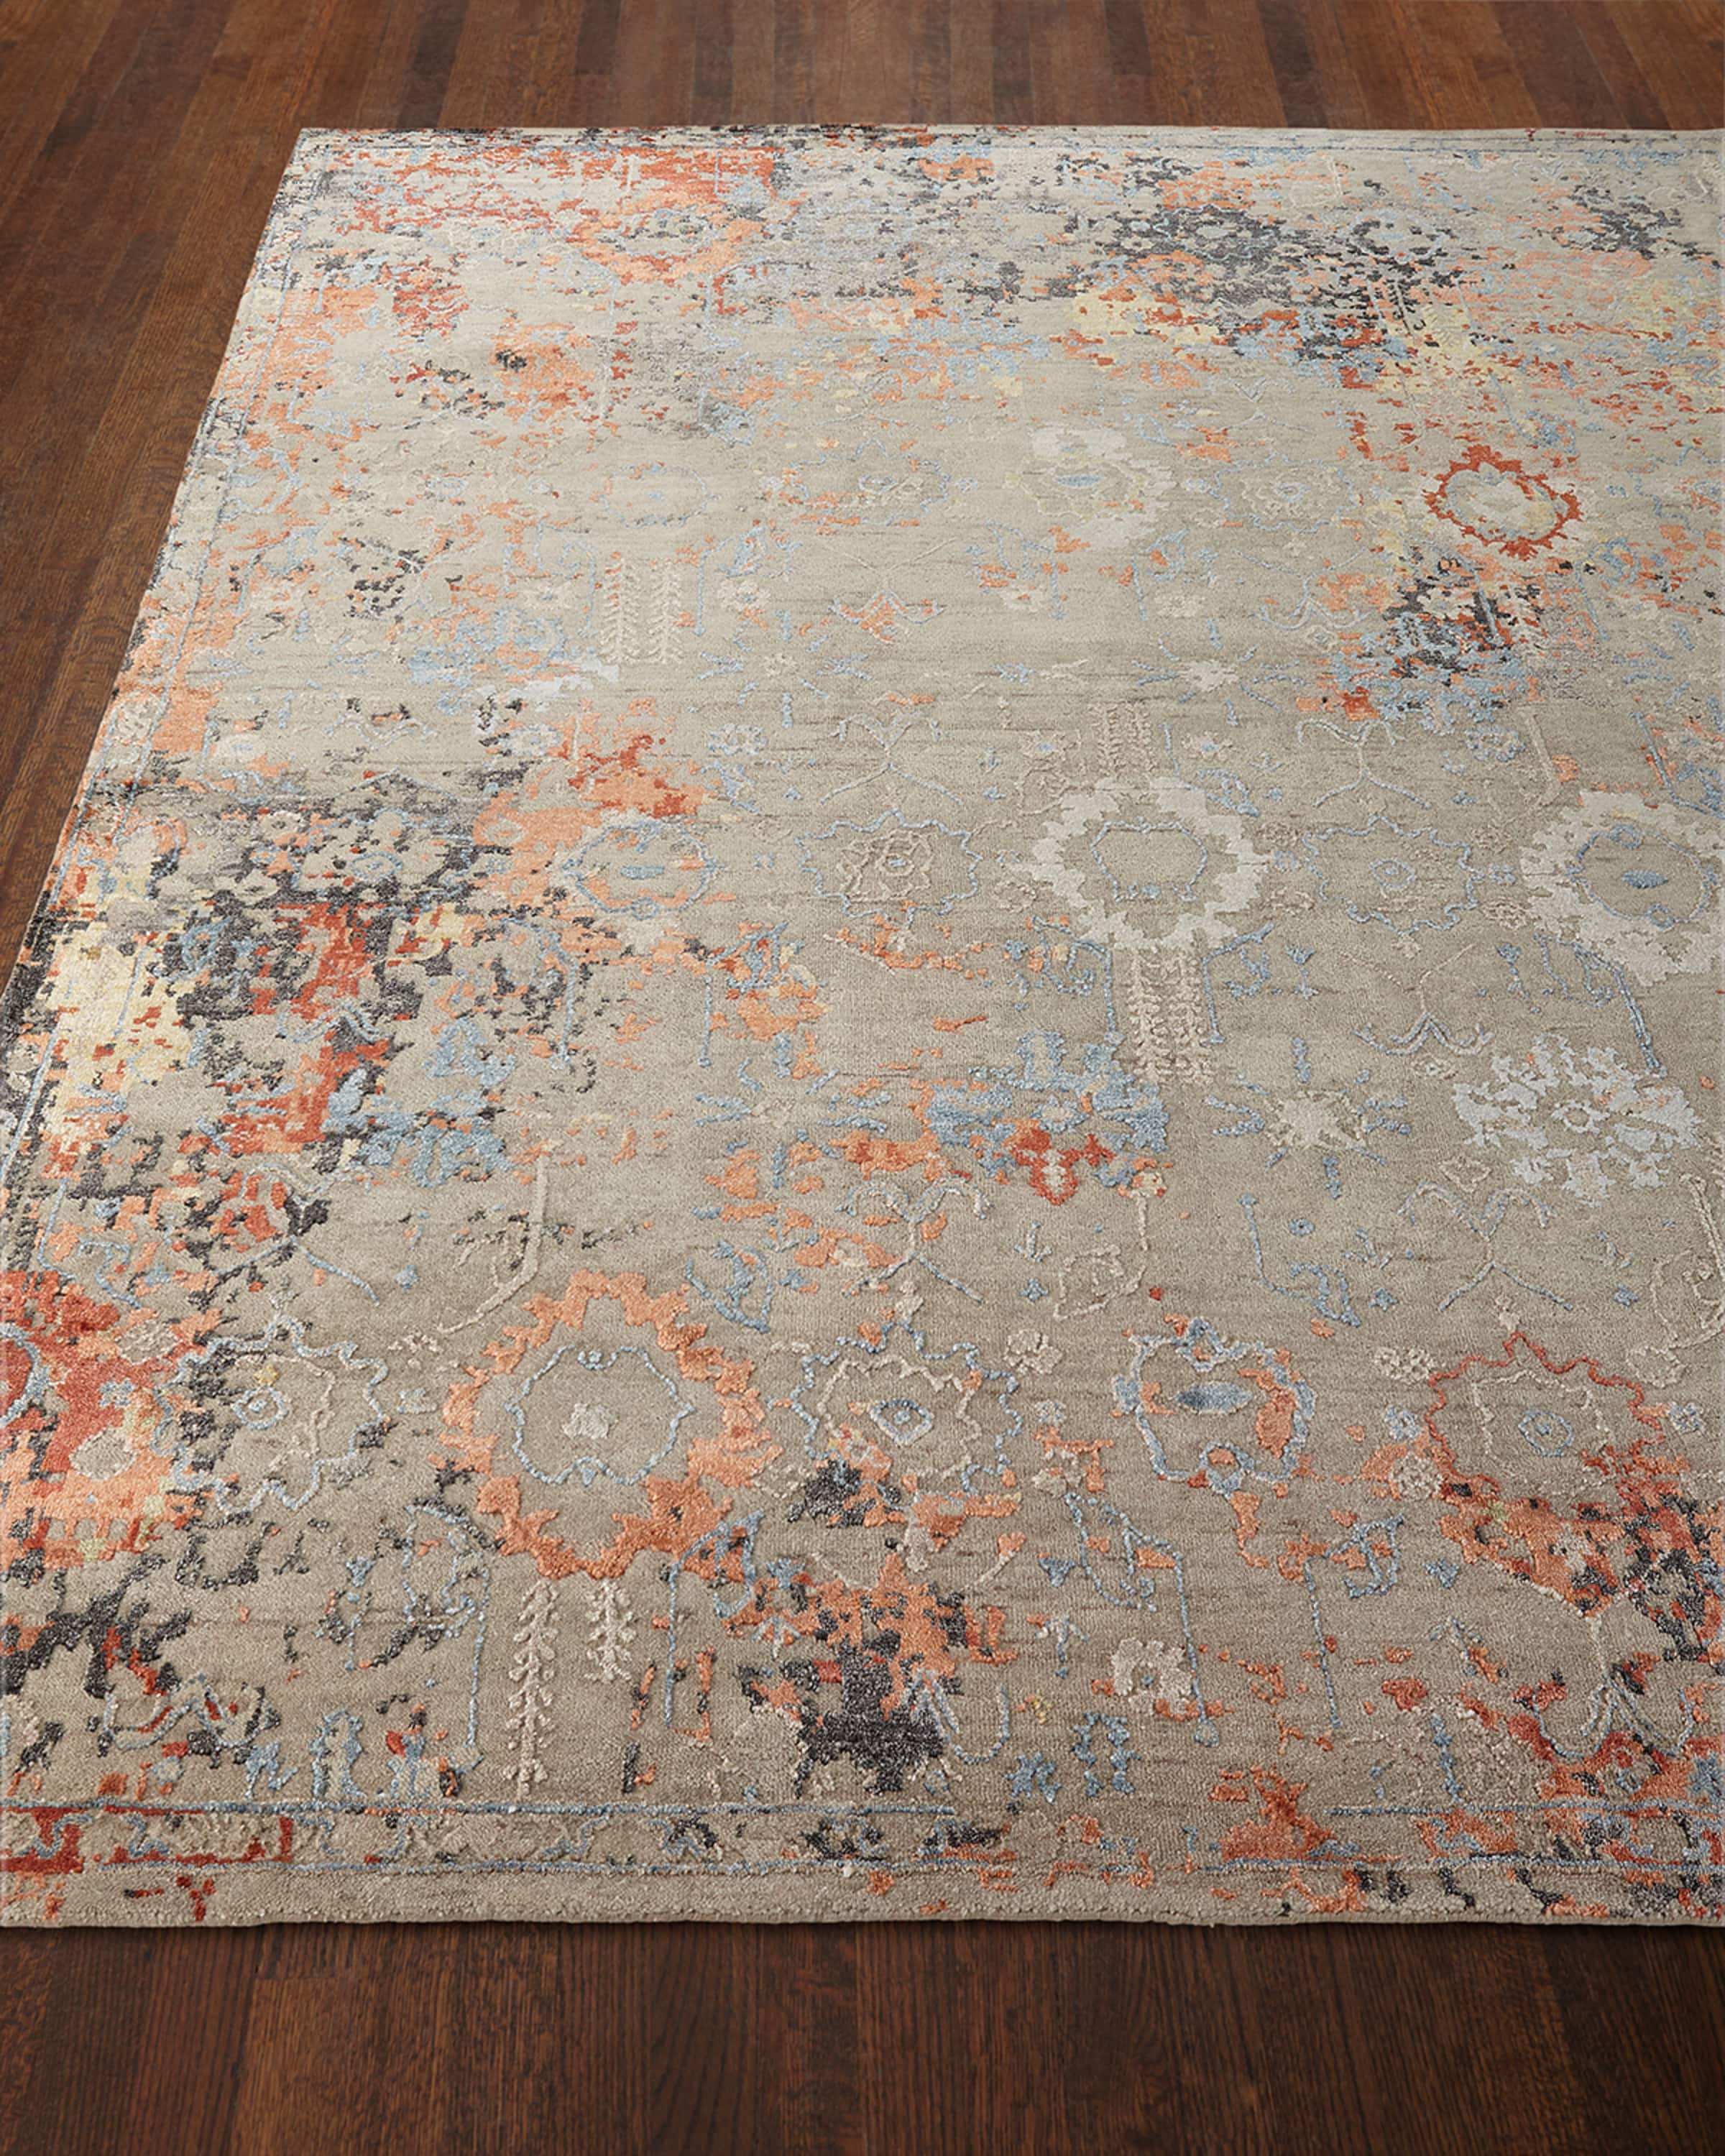 Jenzyn Hand-Knotted Rug, 6' x 9'